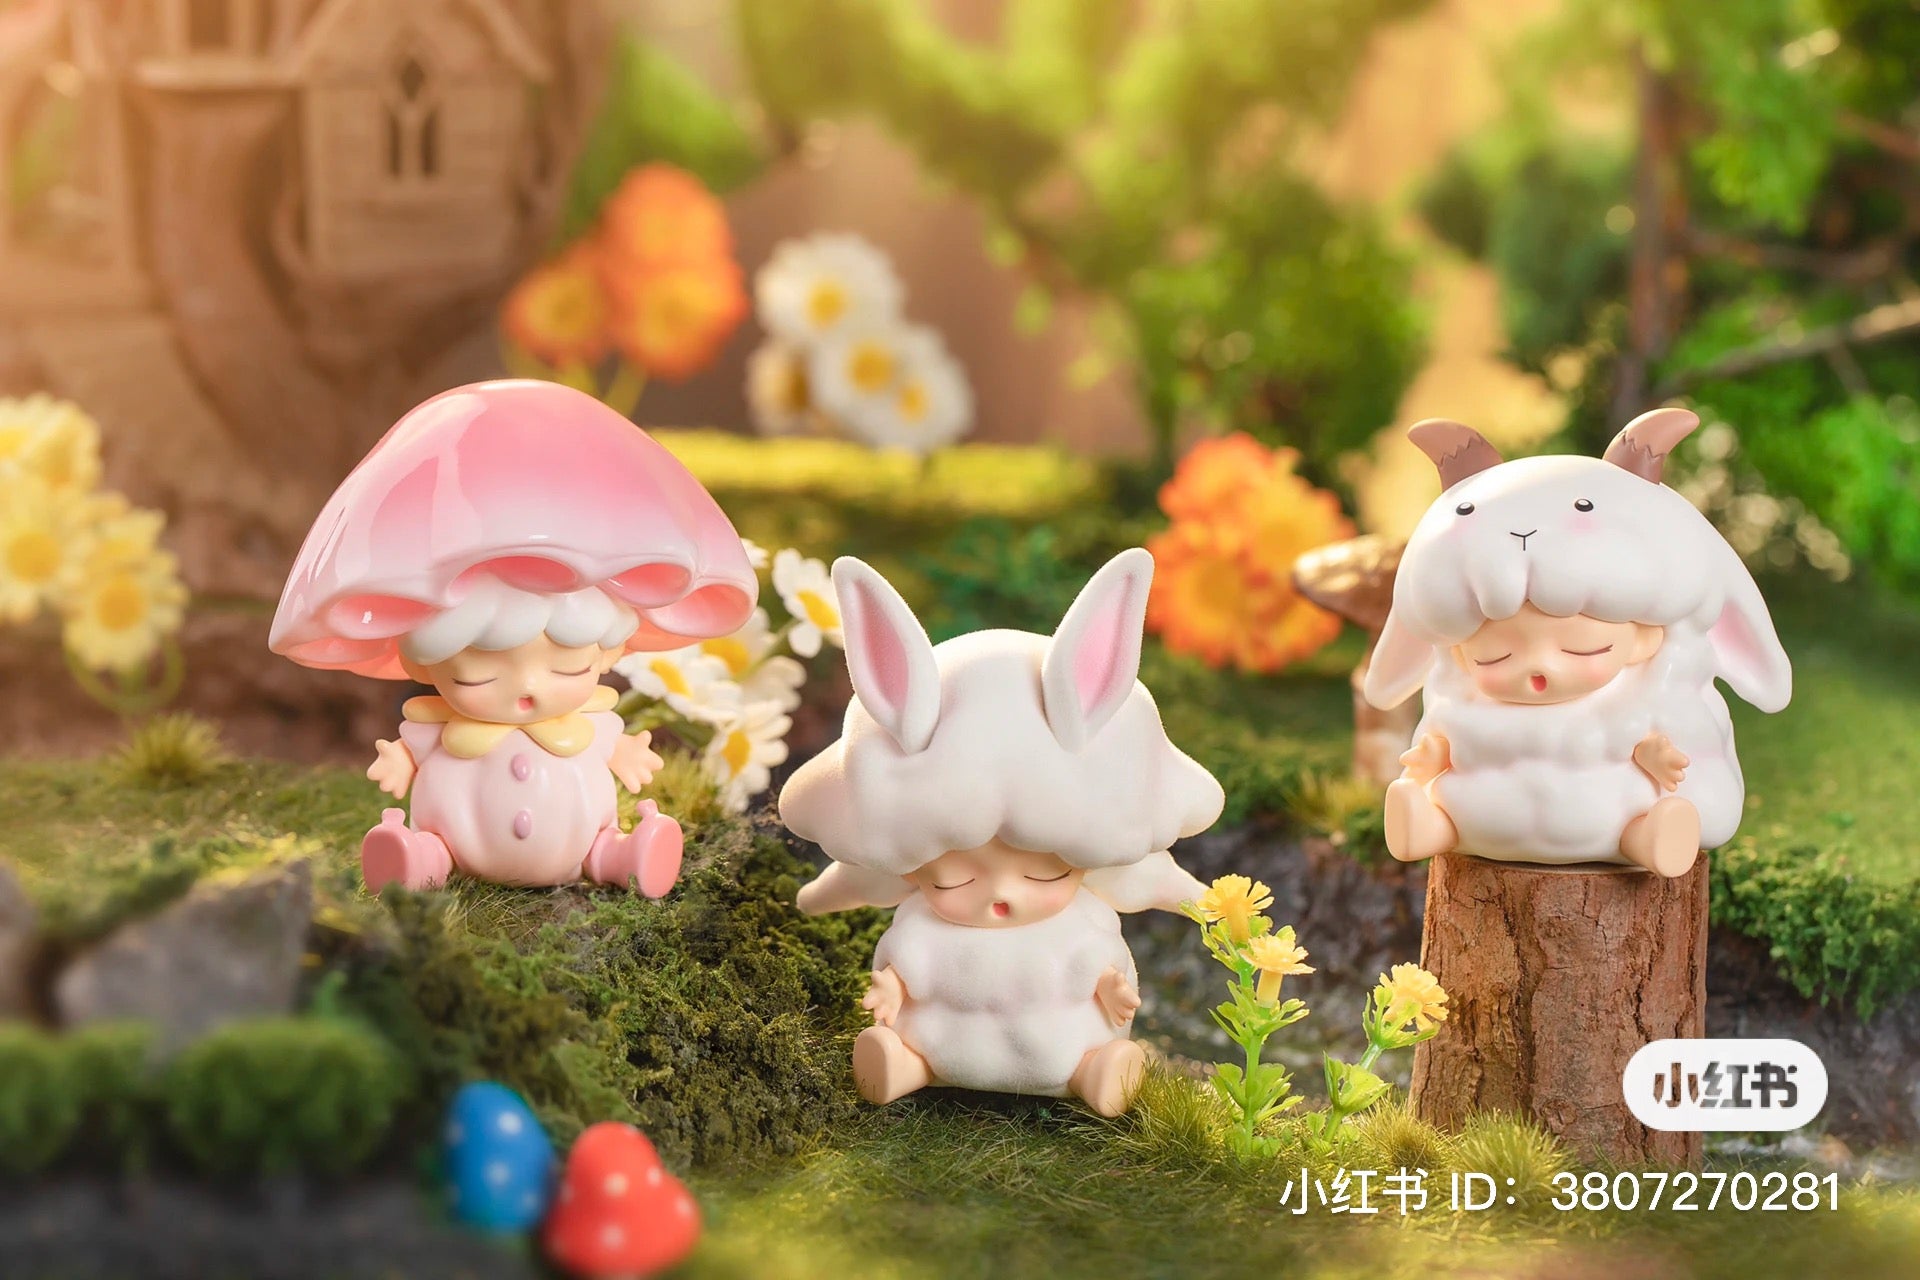 YUMO Natural Journey Blind Box Series - Preorder